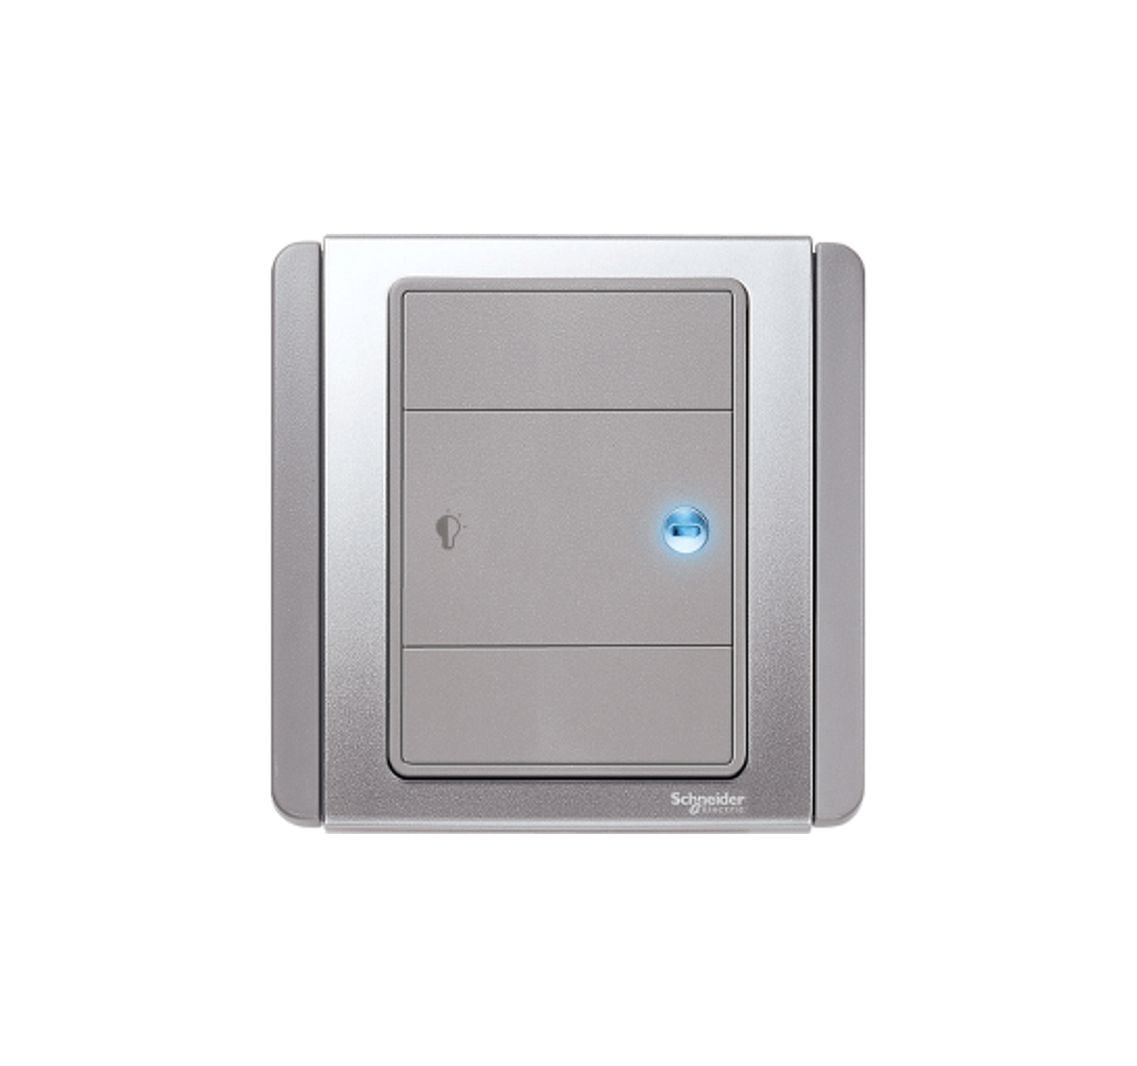 NEO - 600W 1 Gang Horizontal Dimming Switch with Blue LED (Grey Silver)